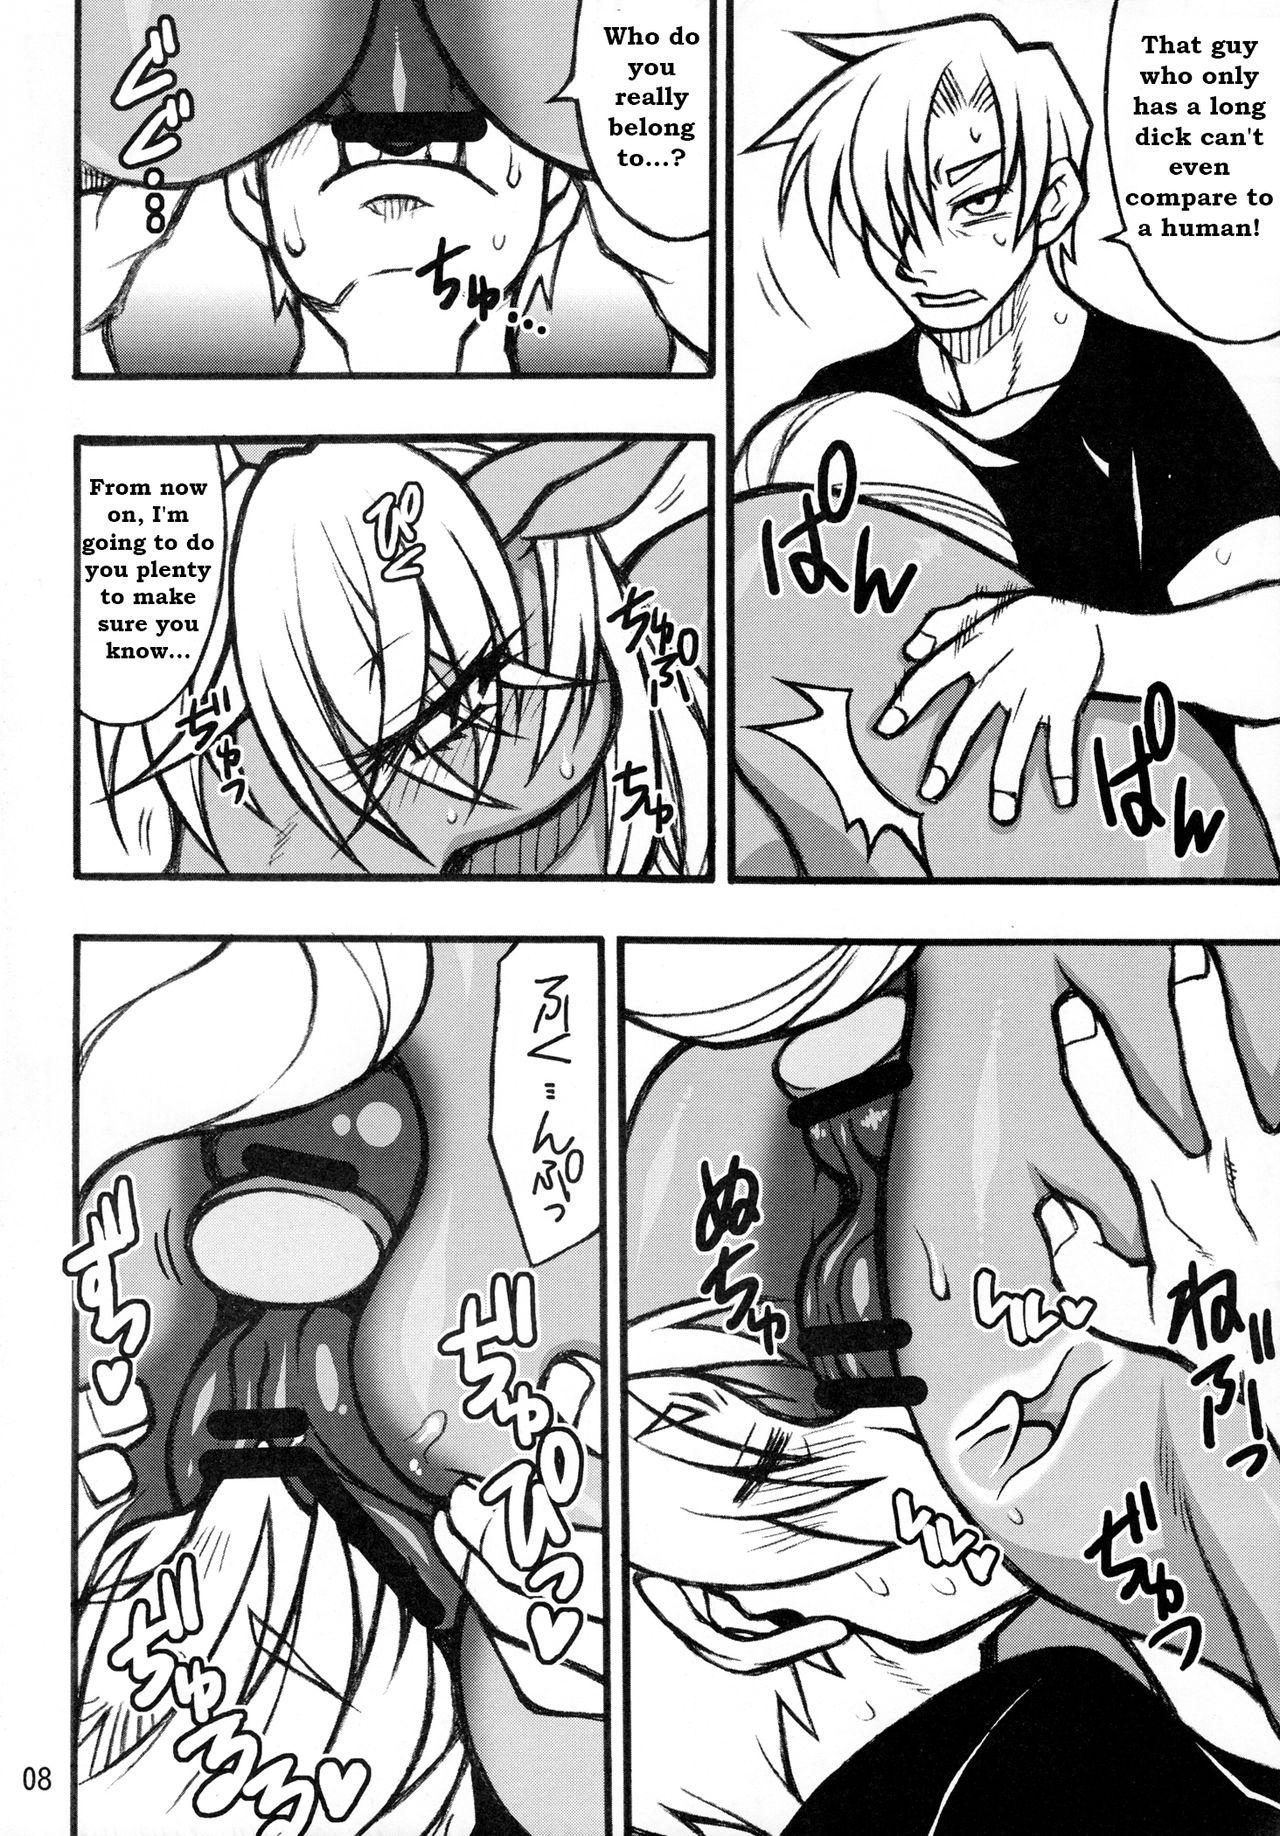 Dancing Mare Holic 2 Kemolover Ch 1, 2, 8, 13, 16 3some - Page 4